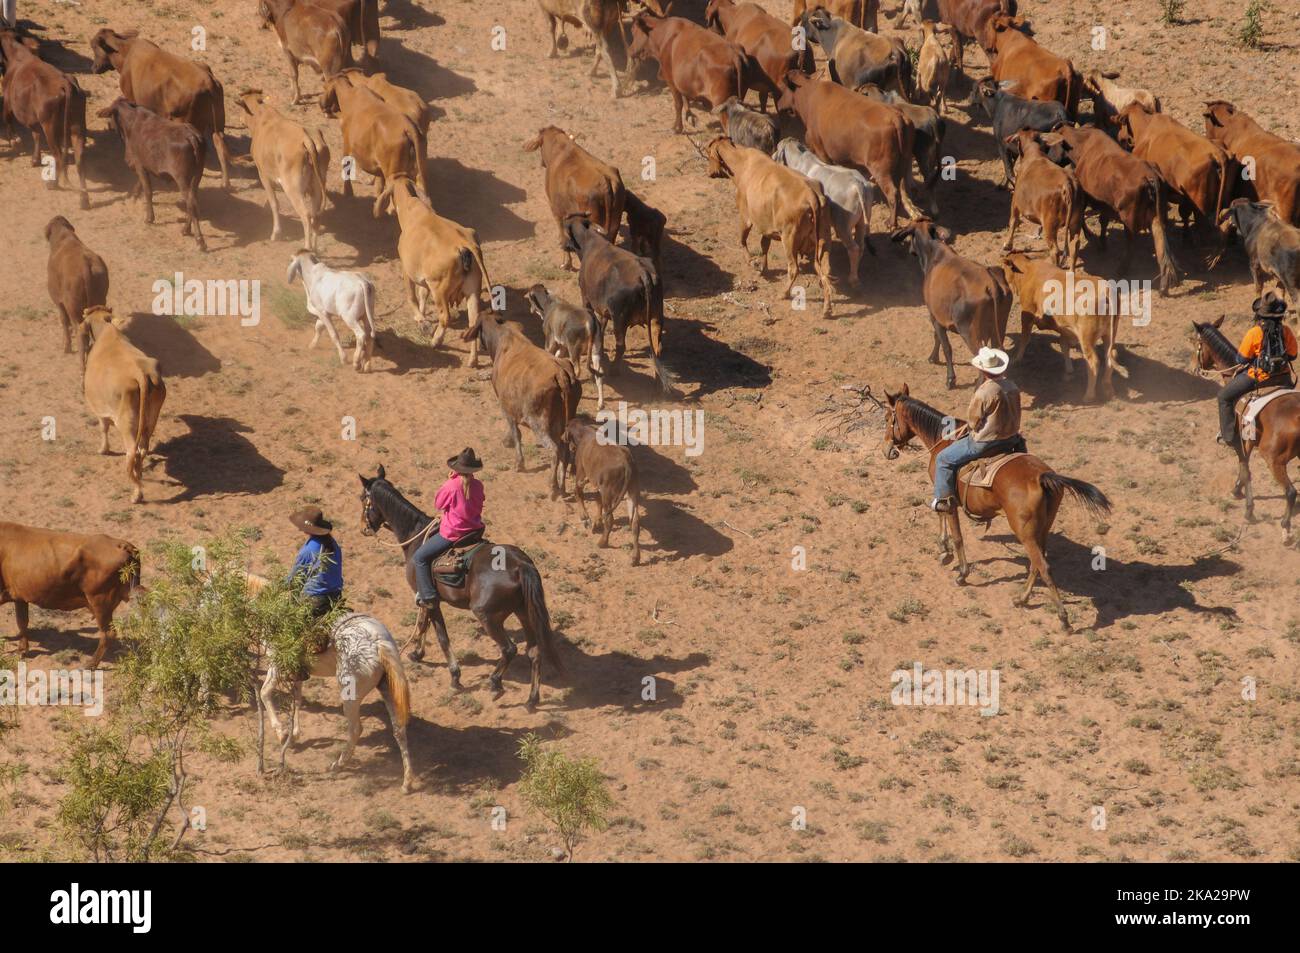 Aerial cattle mustering in the outback of Australia Stock Photo